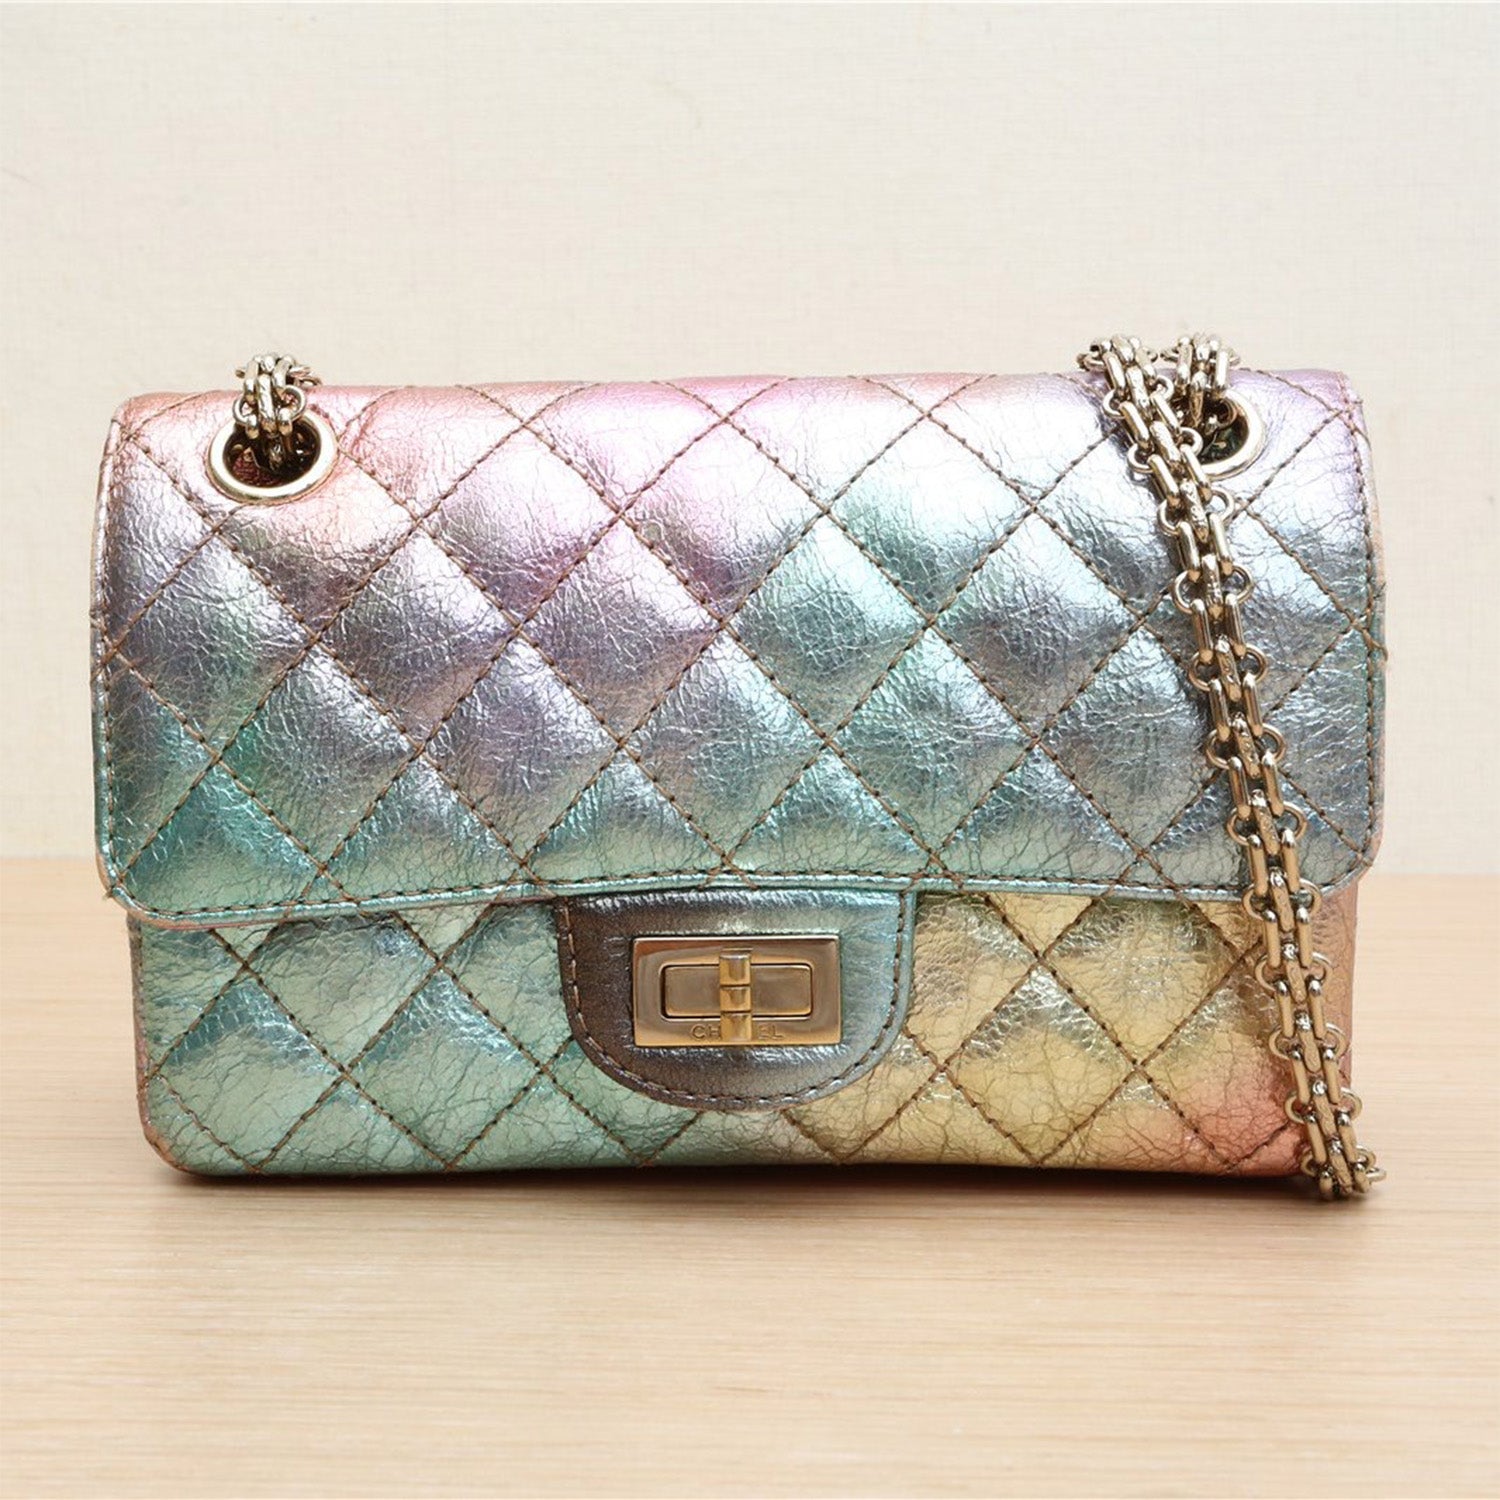 CHANEL Metallic Goatskin Quilted Mini 2.55 Reissue Flap Multicolor 1228059